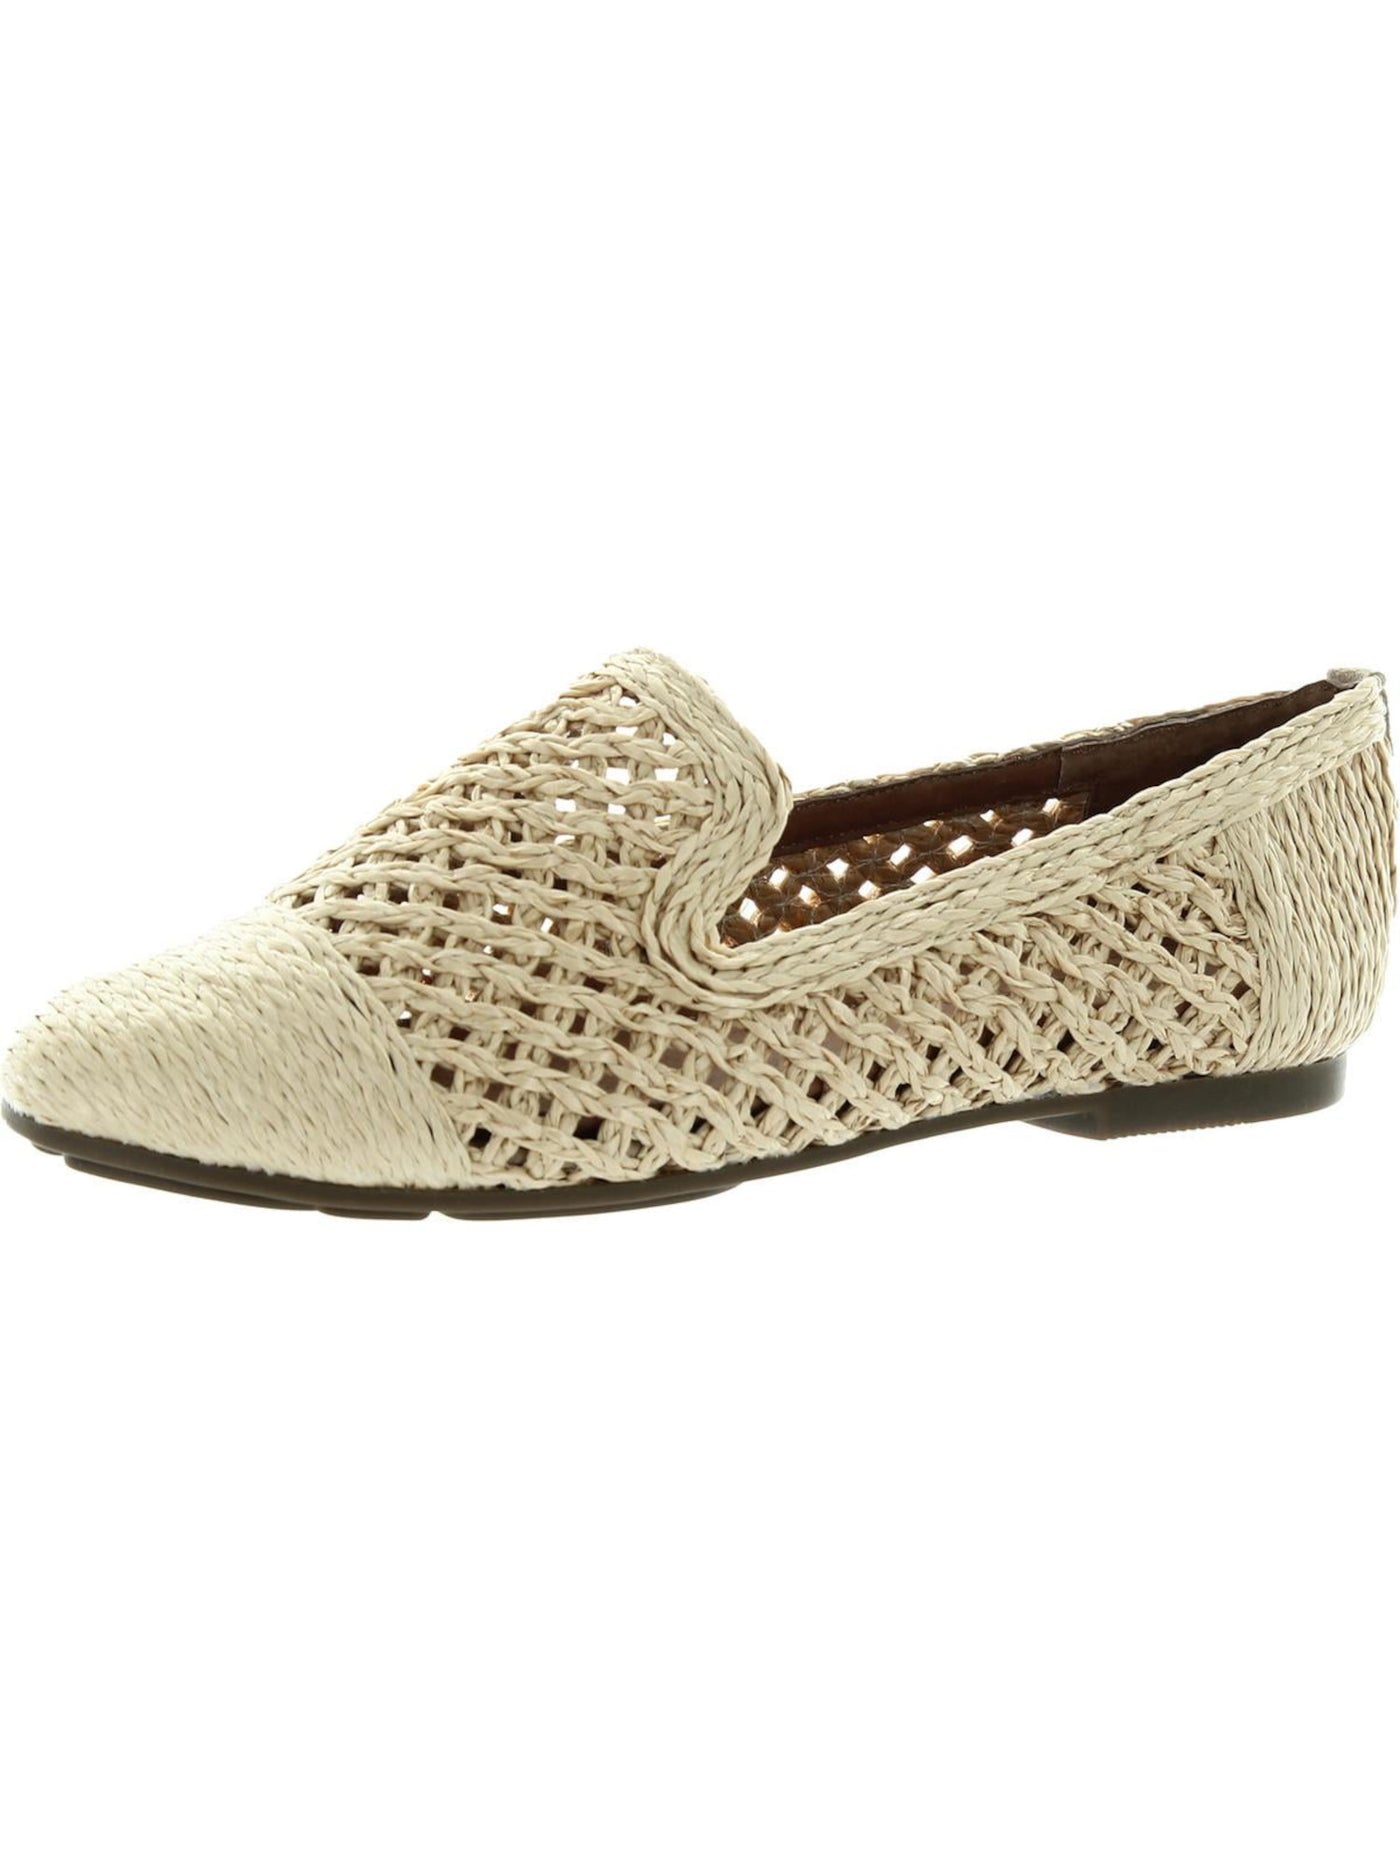 GENTLE SOULS KENNETH COLE Womens Beige Cushioned Braided Breathable Eugene Almond Toe Slip On Loafers Shoes 5